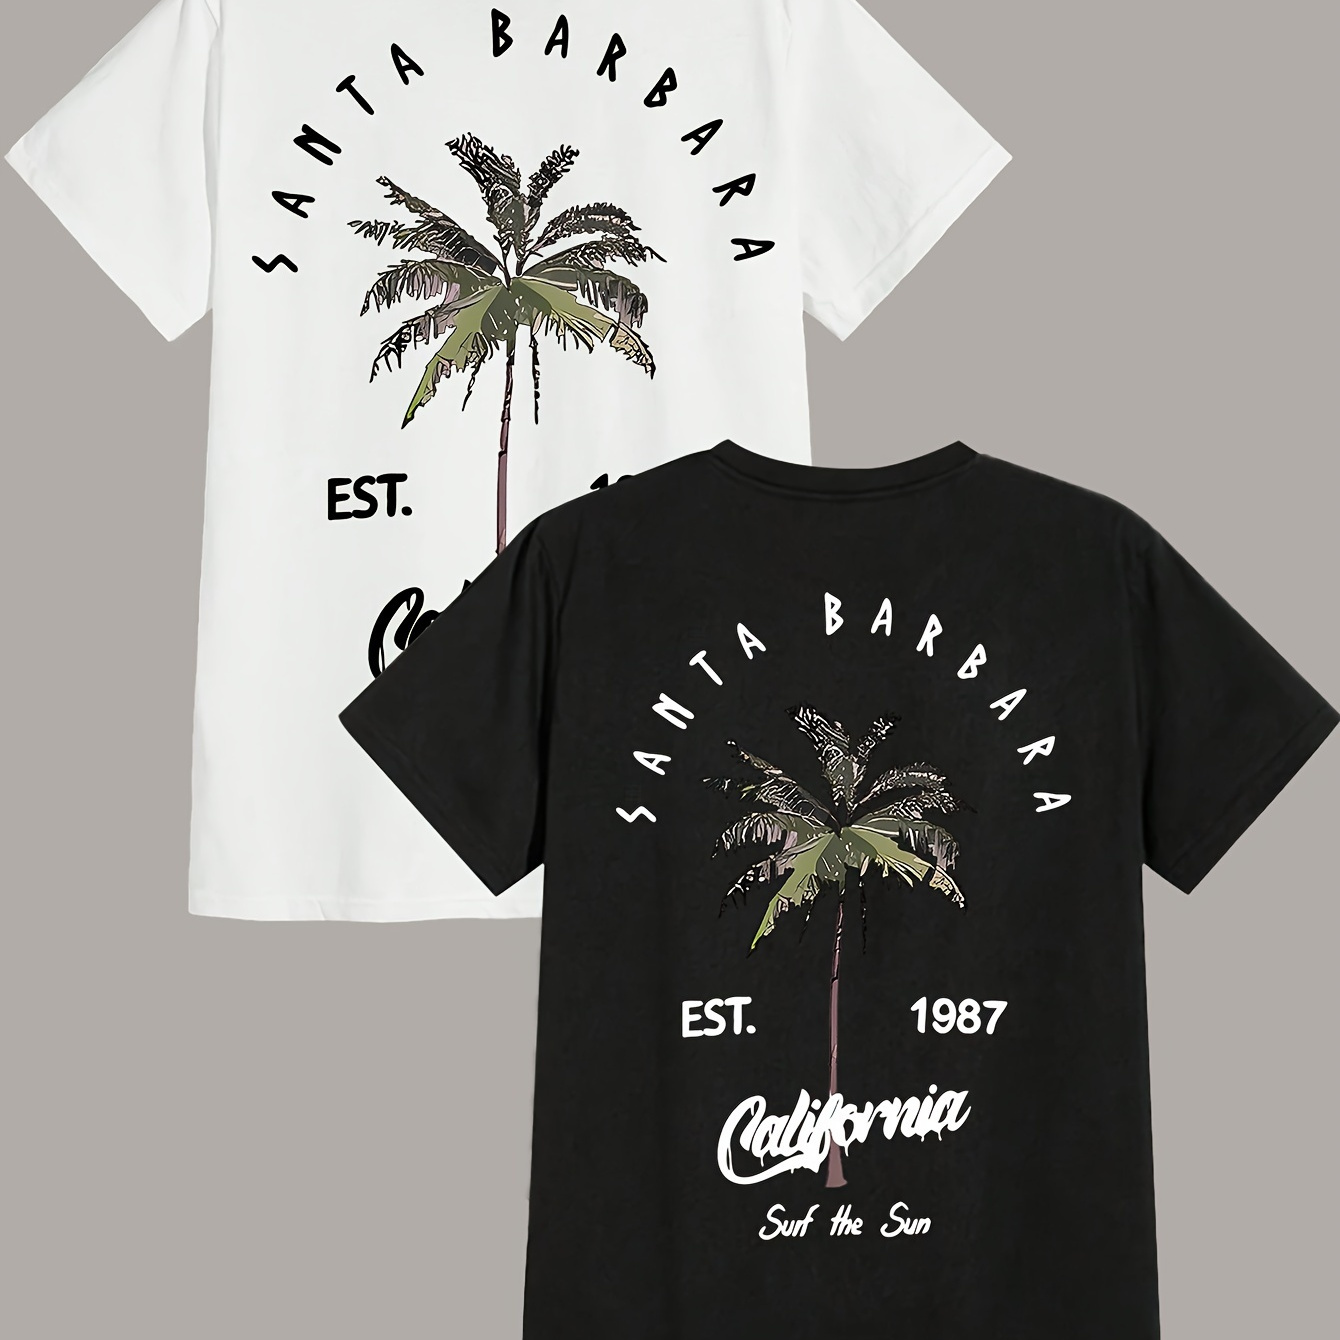 

Set Of 2 Coconut Tree And Lettering Graphic Men's Comfort T-shirts, Casual Short Sleeve Summer T-shirt Tops